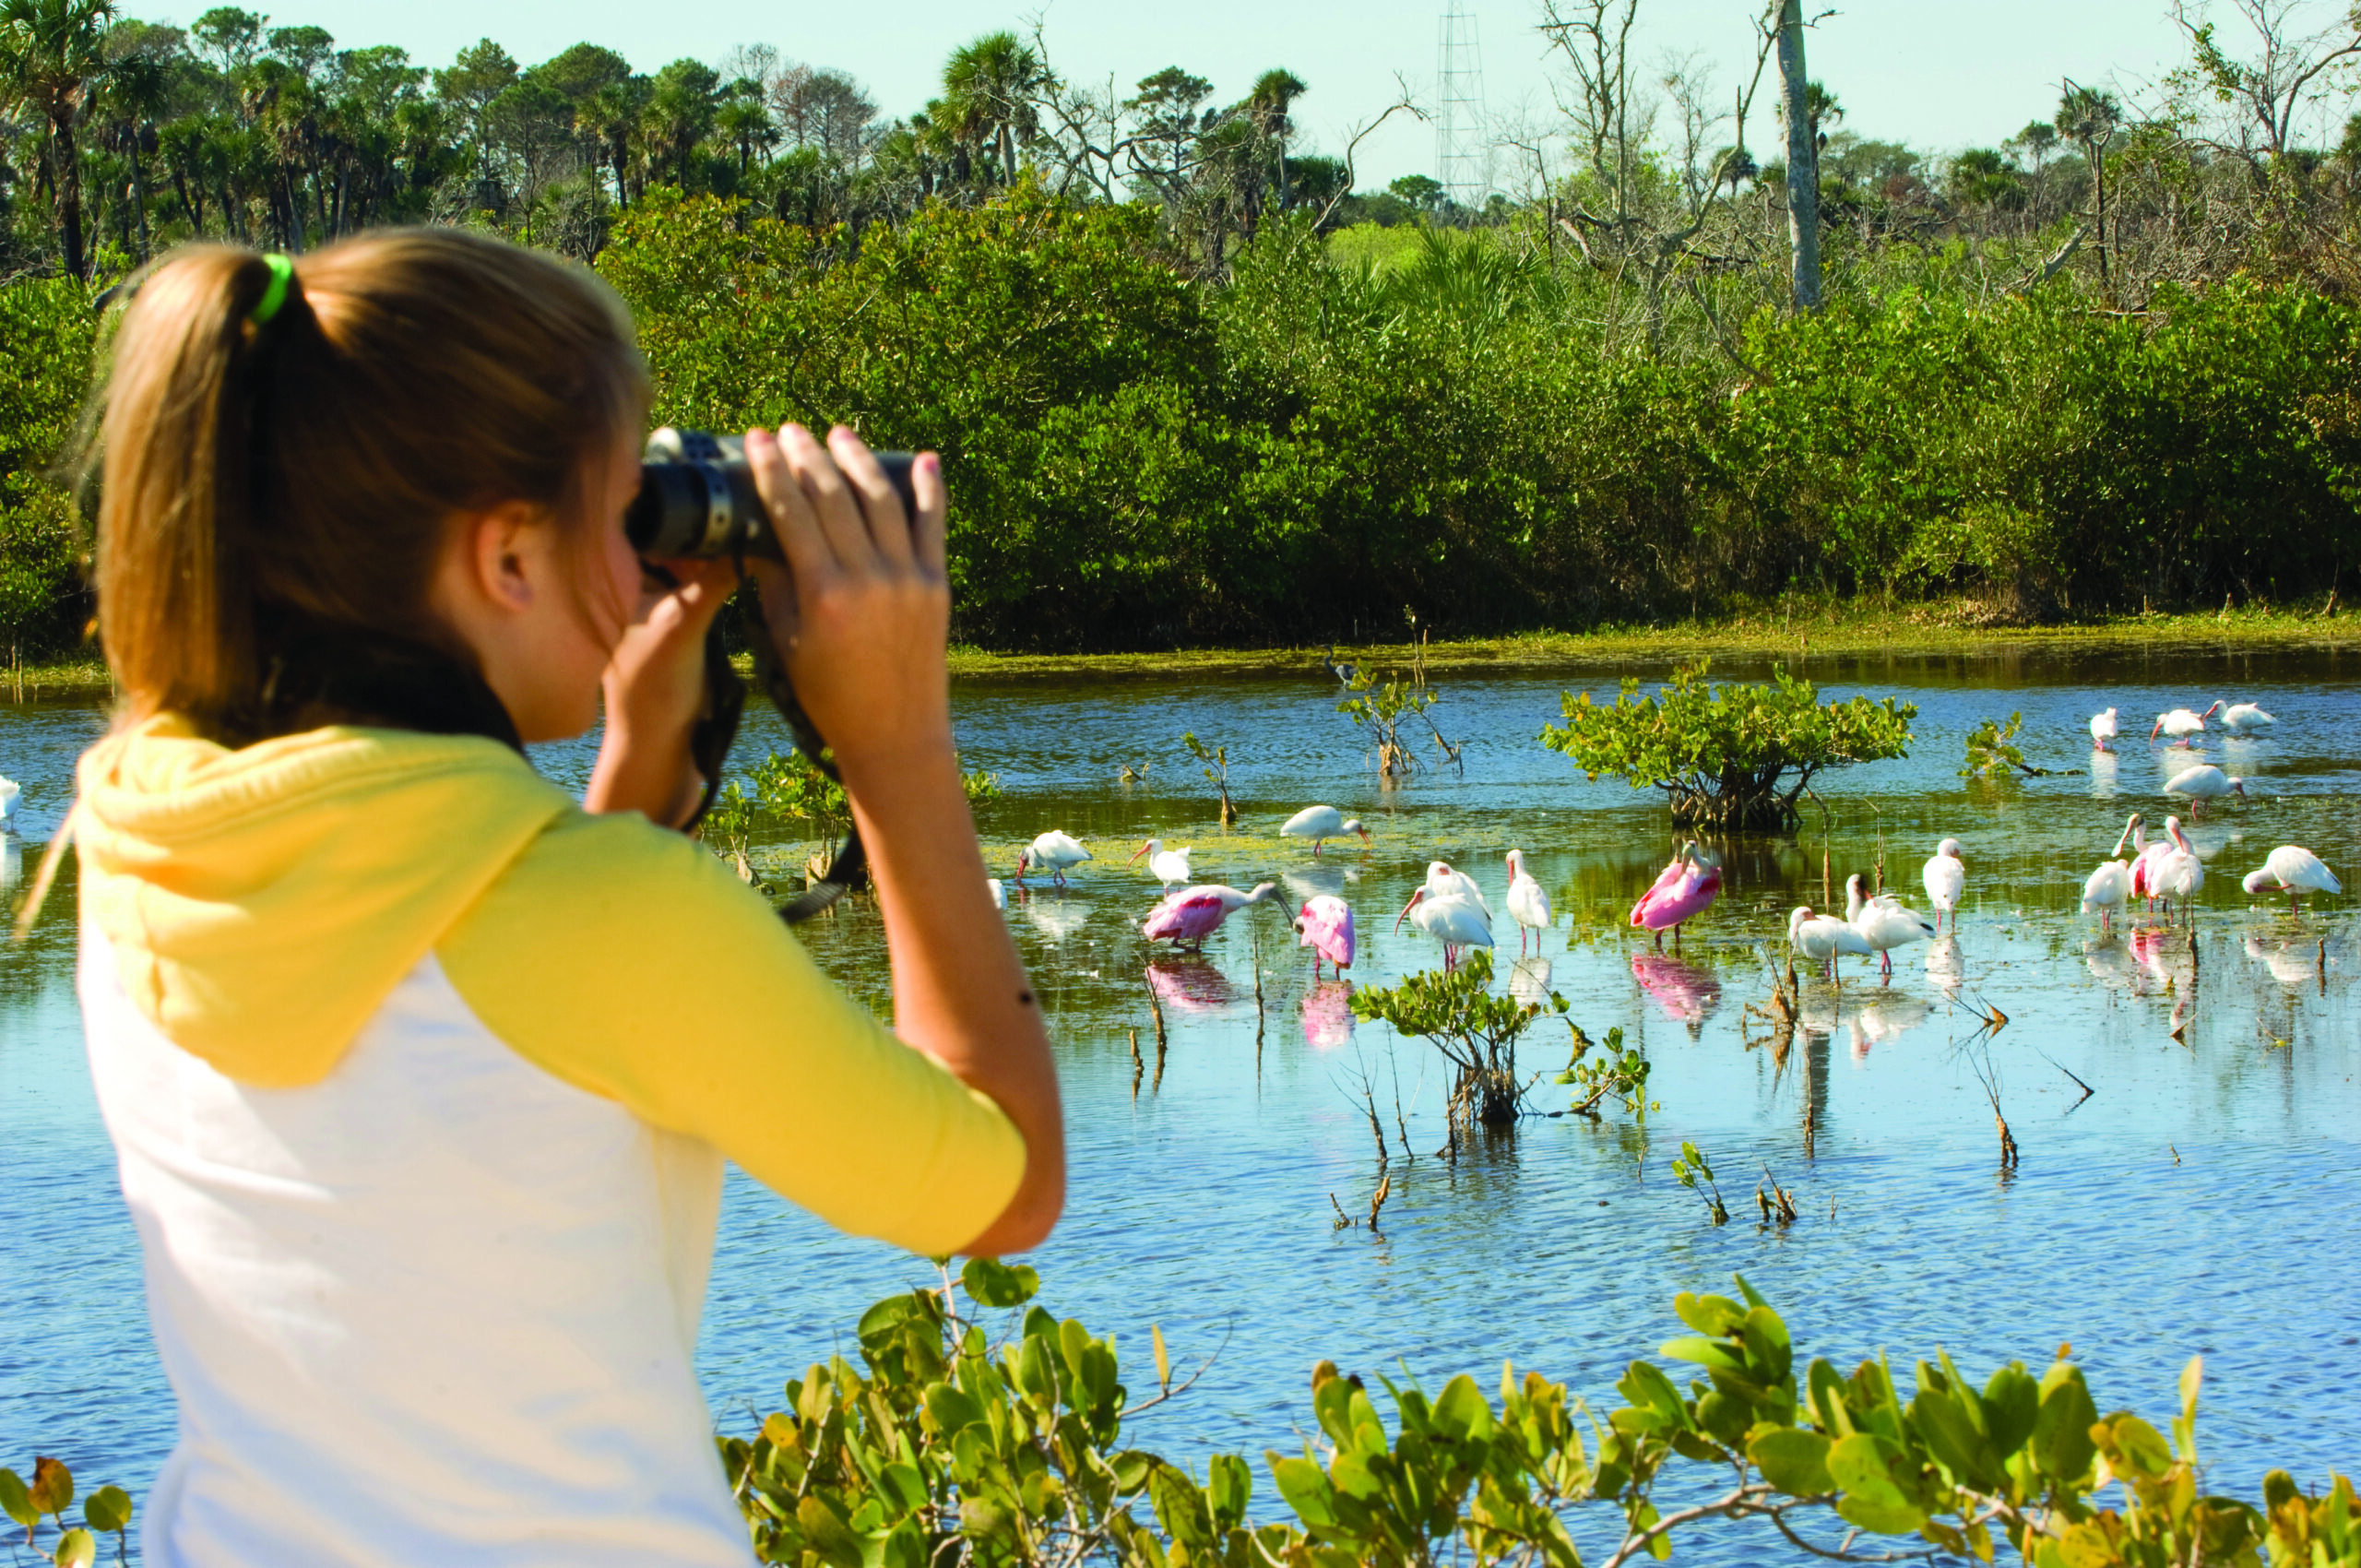 Birdwatching at the Space Coast Birding and Wildlife Festival in Titusville, FL